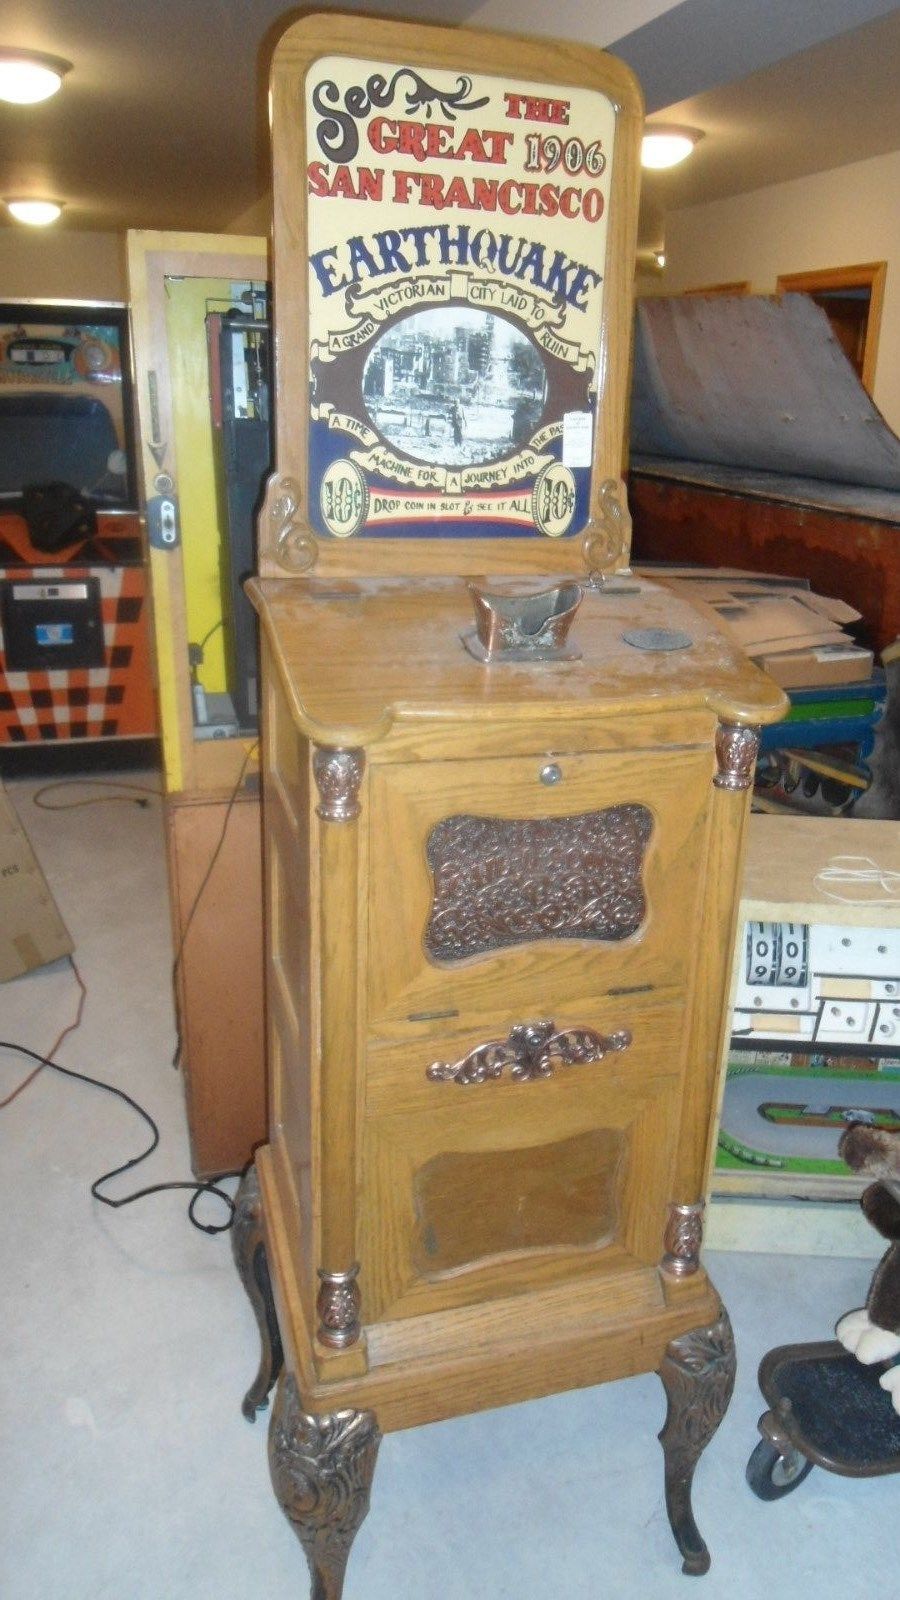 vintage coin operated machines